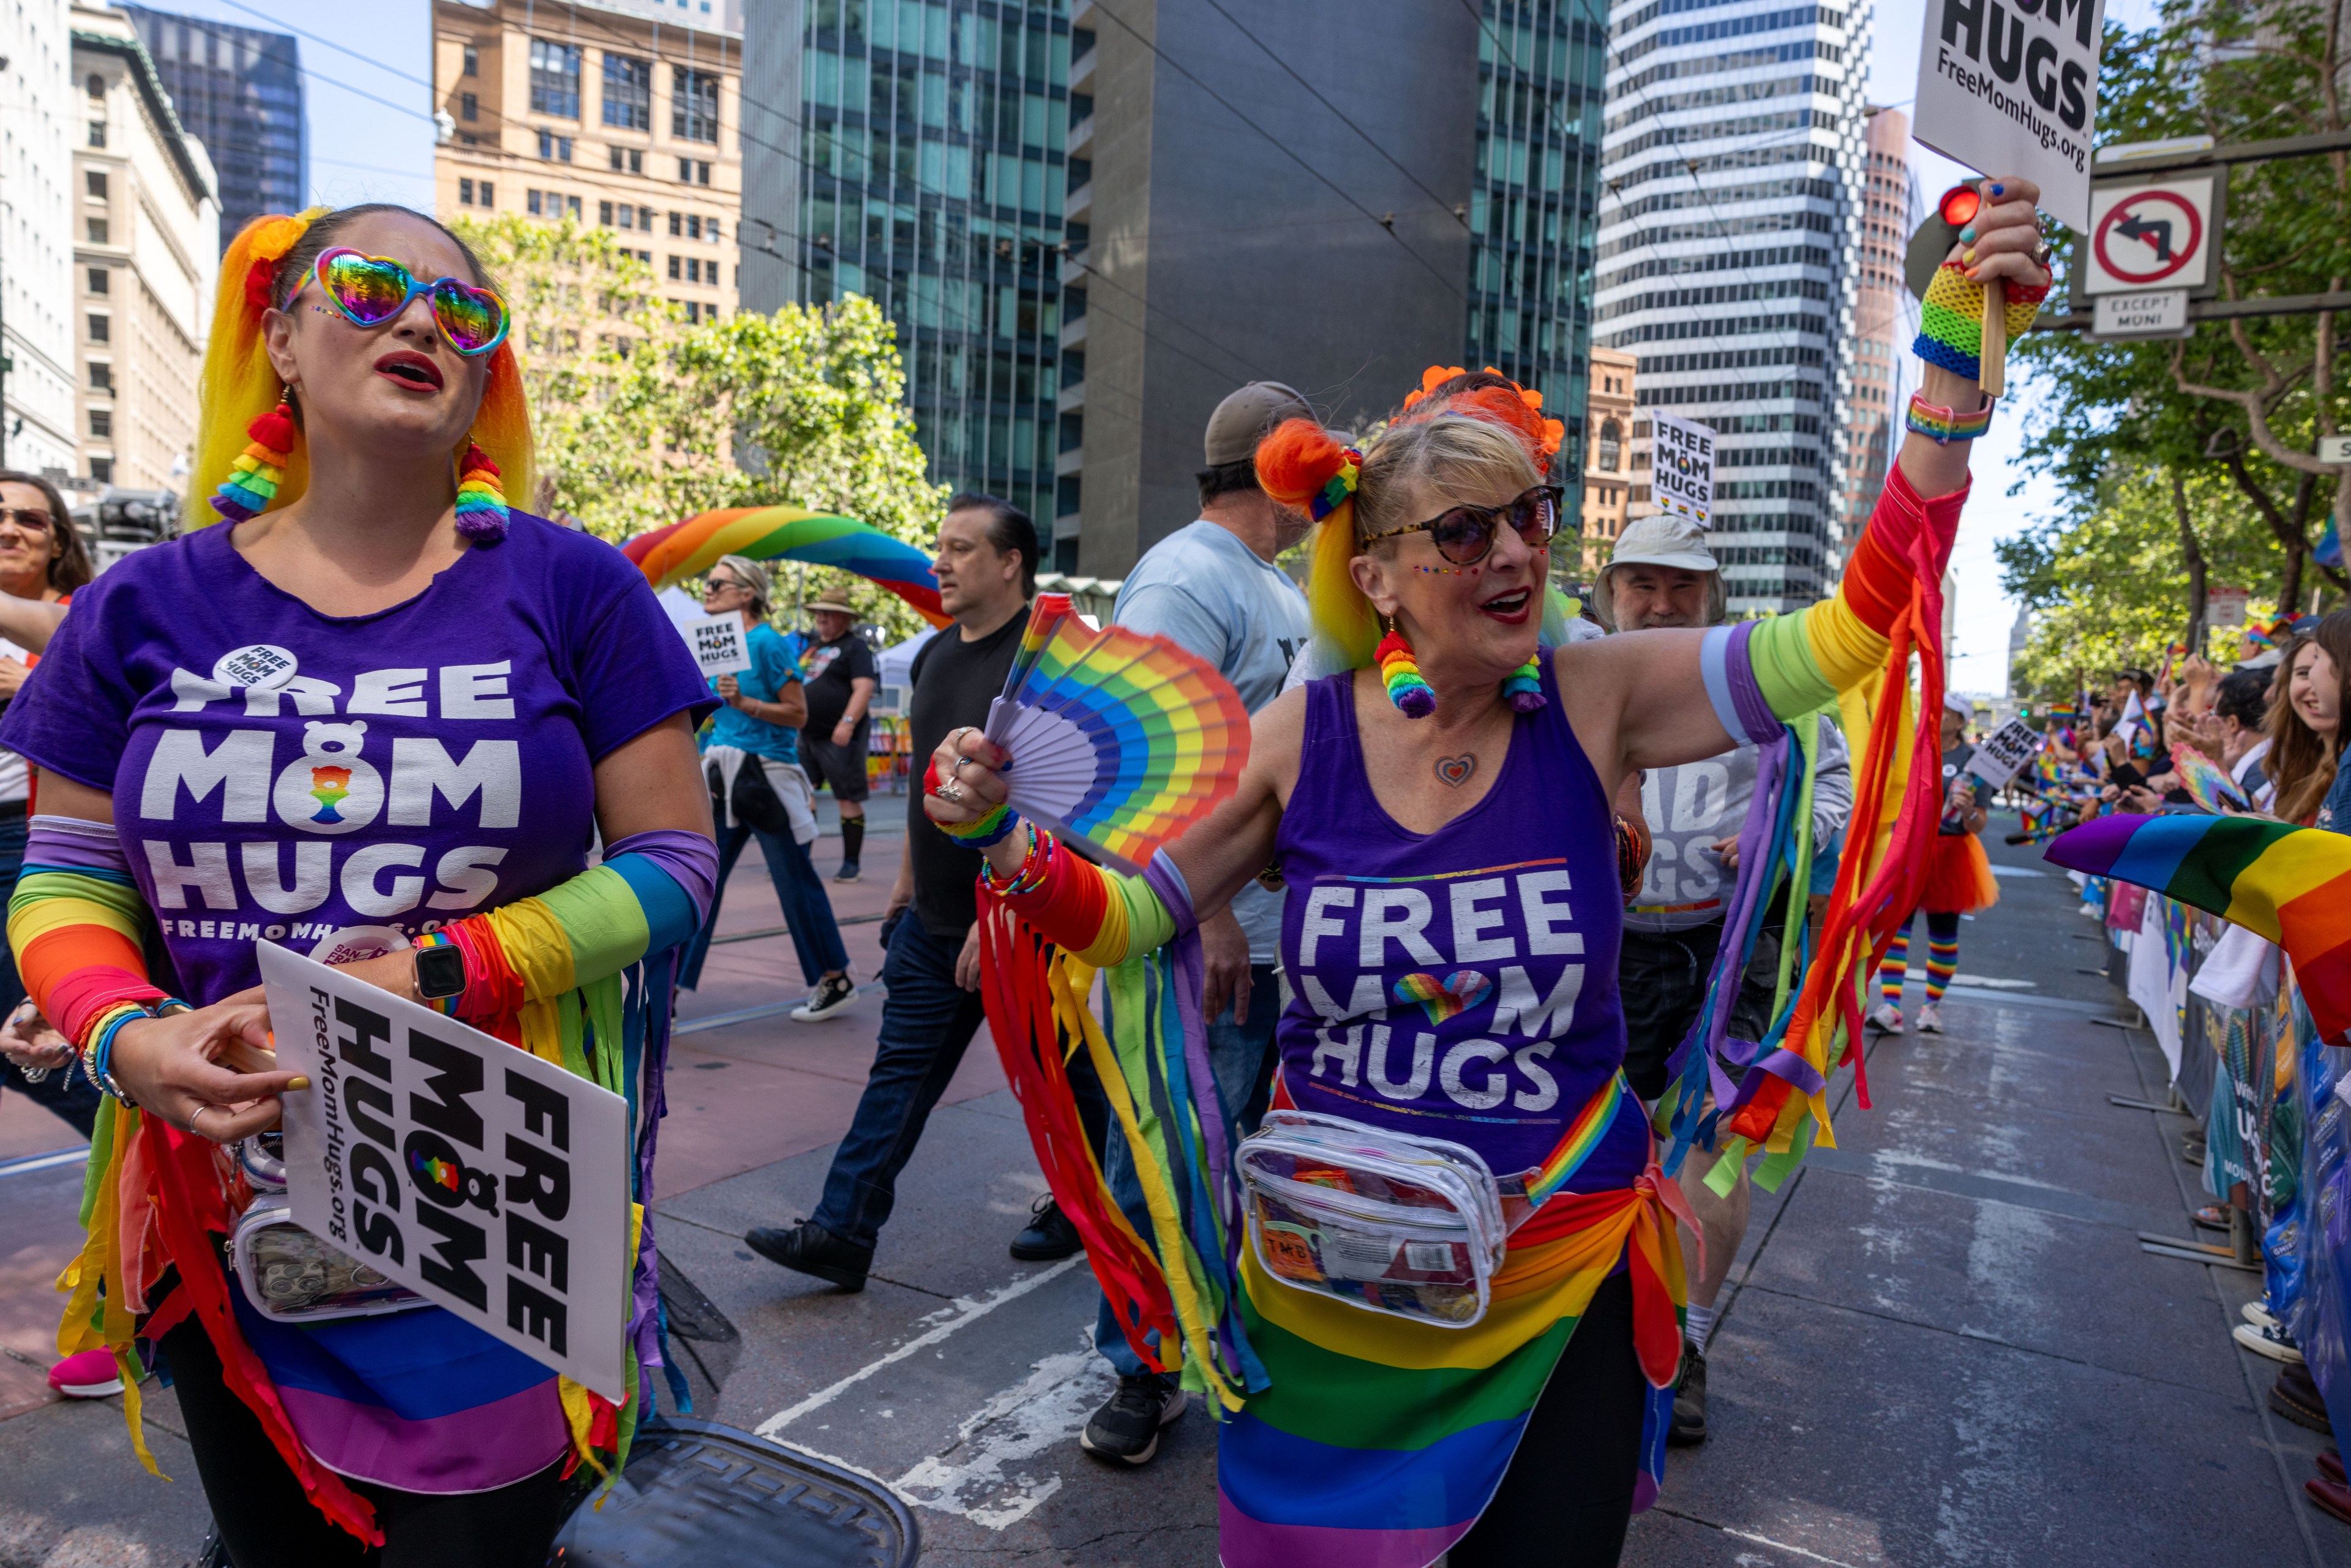 Two women in colorful outfits and &quot;Free Mom Hugs&quot; shirts are joyfully participating in a parade, holding rainbow fans and signs, surrounded by buildings and a cheering crowd.